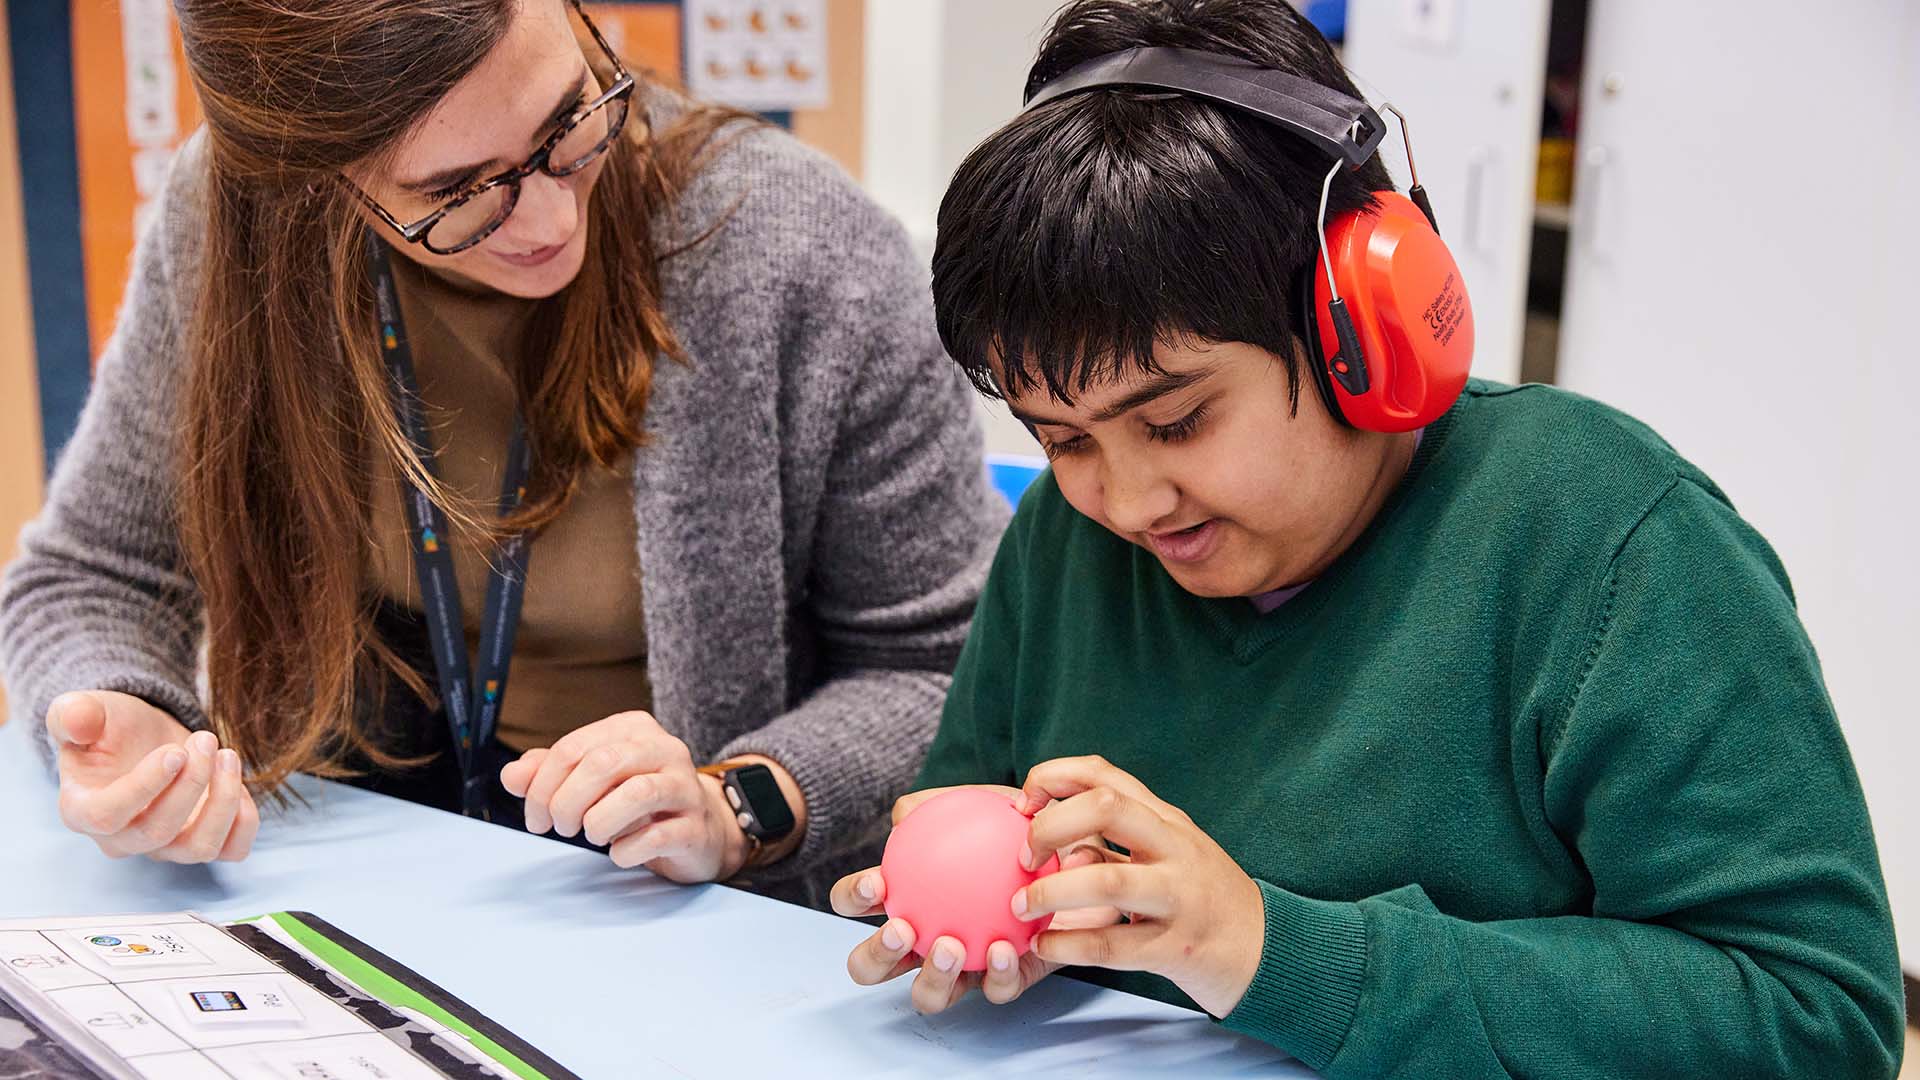 Photo of teacher sitting at a classroom desk with a young autistic person. Both people are smiling and looking down at a small sensory toy the young person is holding.